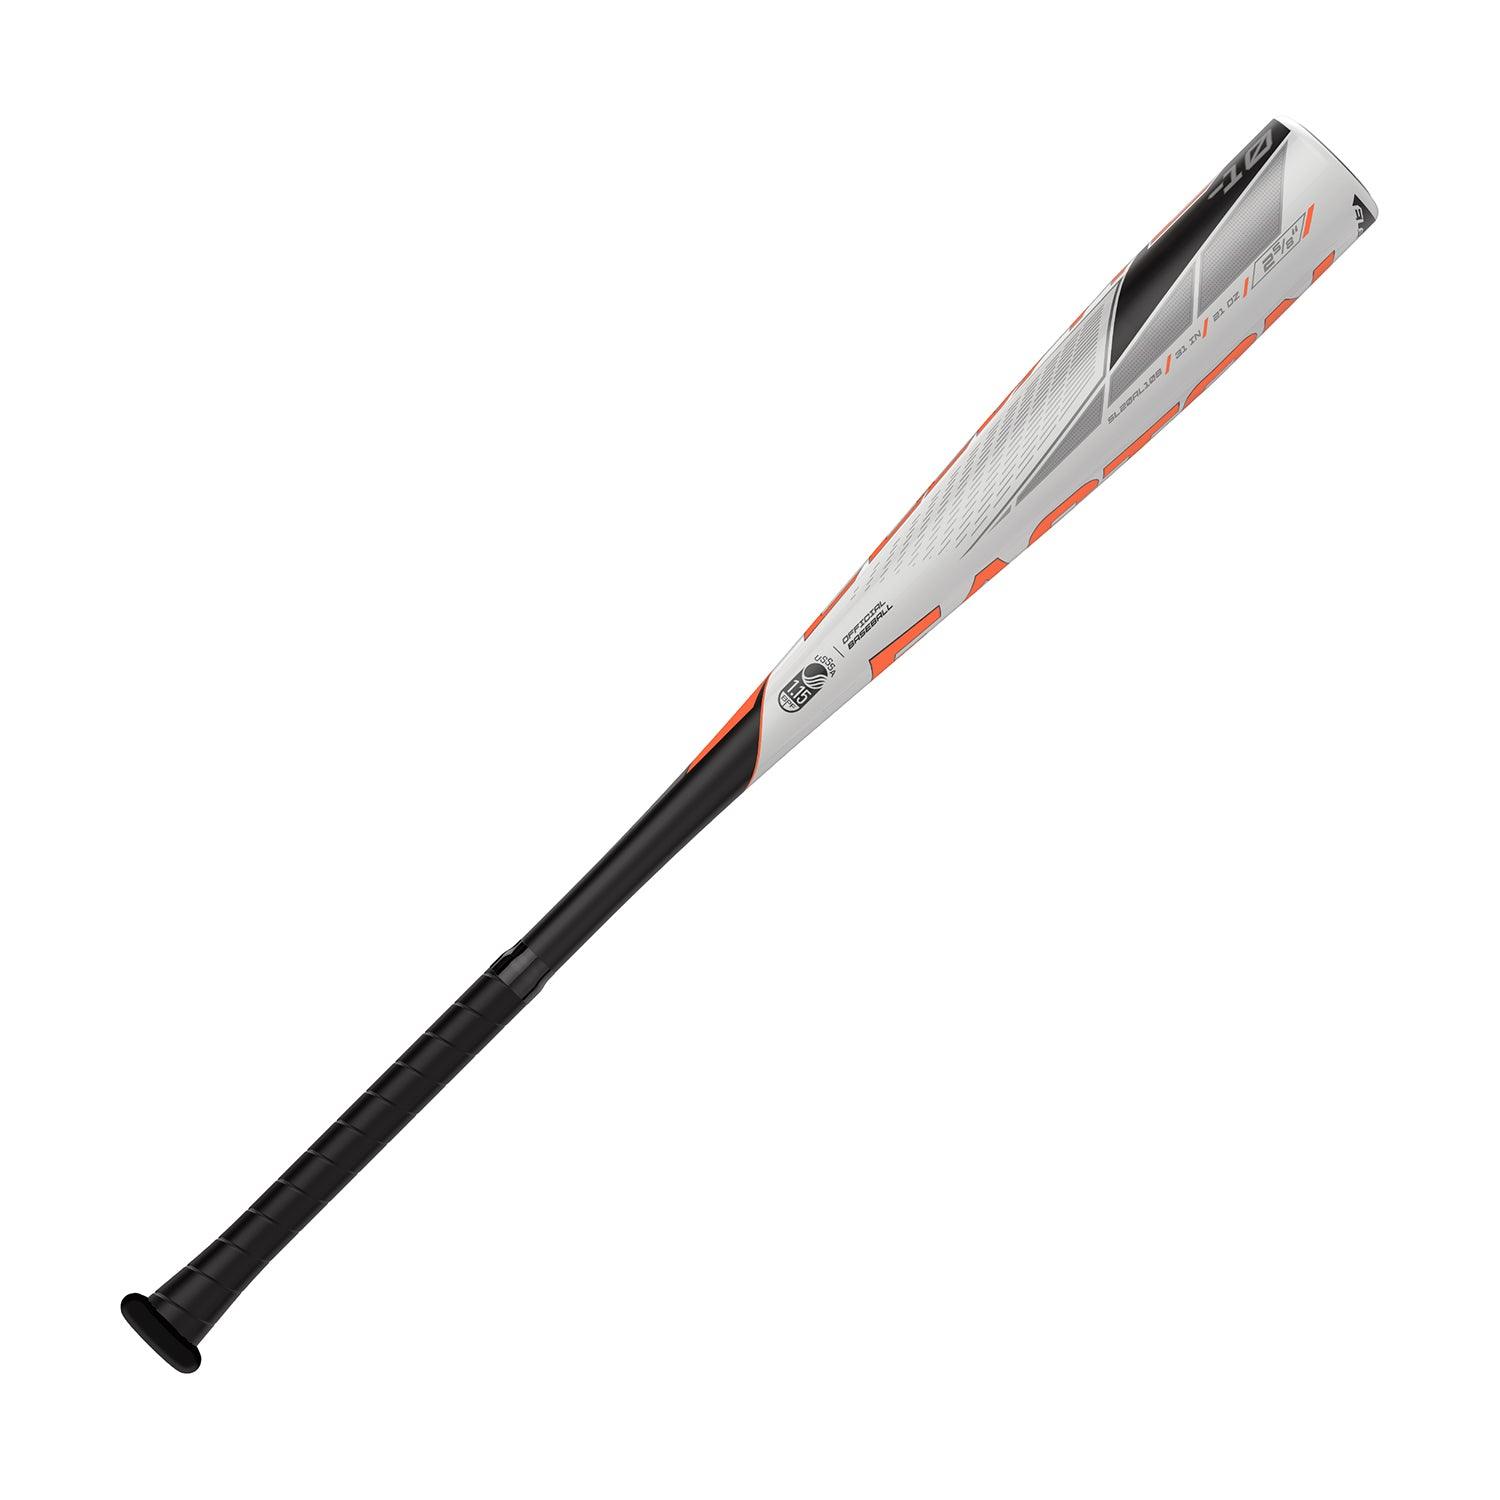 Elevate -10 USSSA 2 5/8" - Sports Excellence